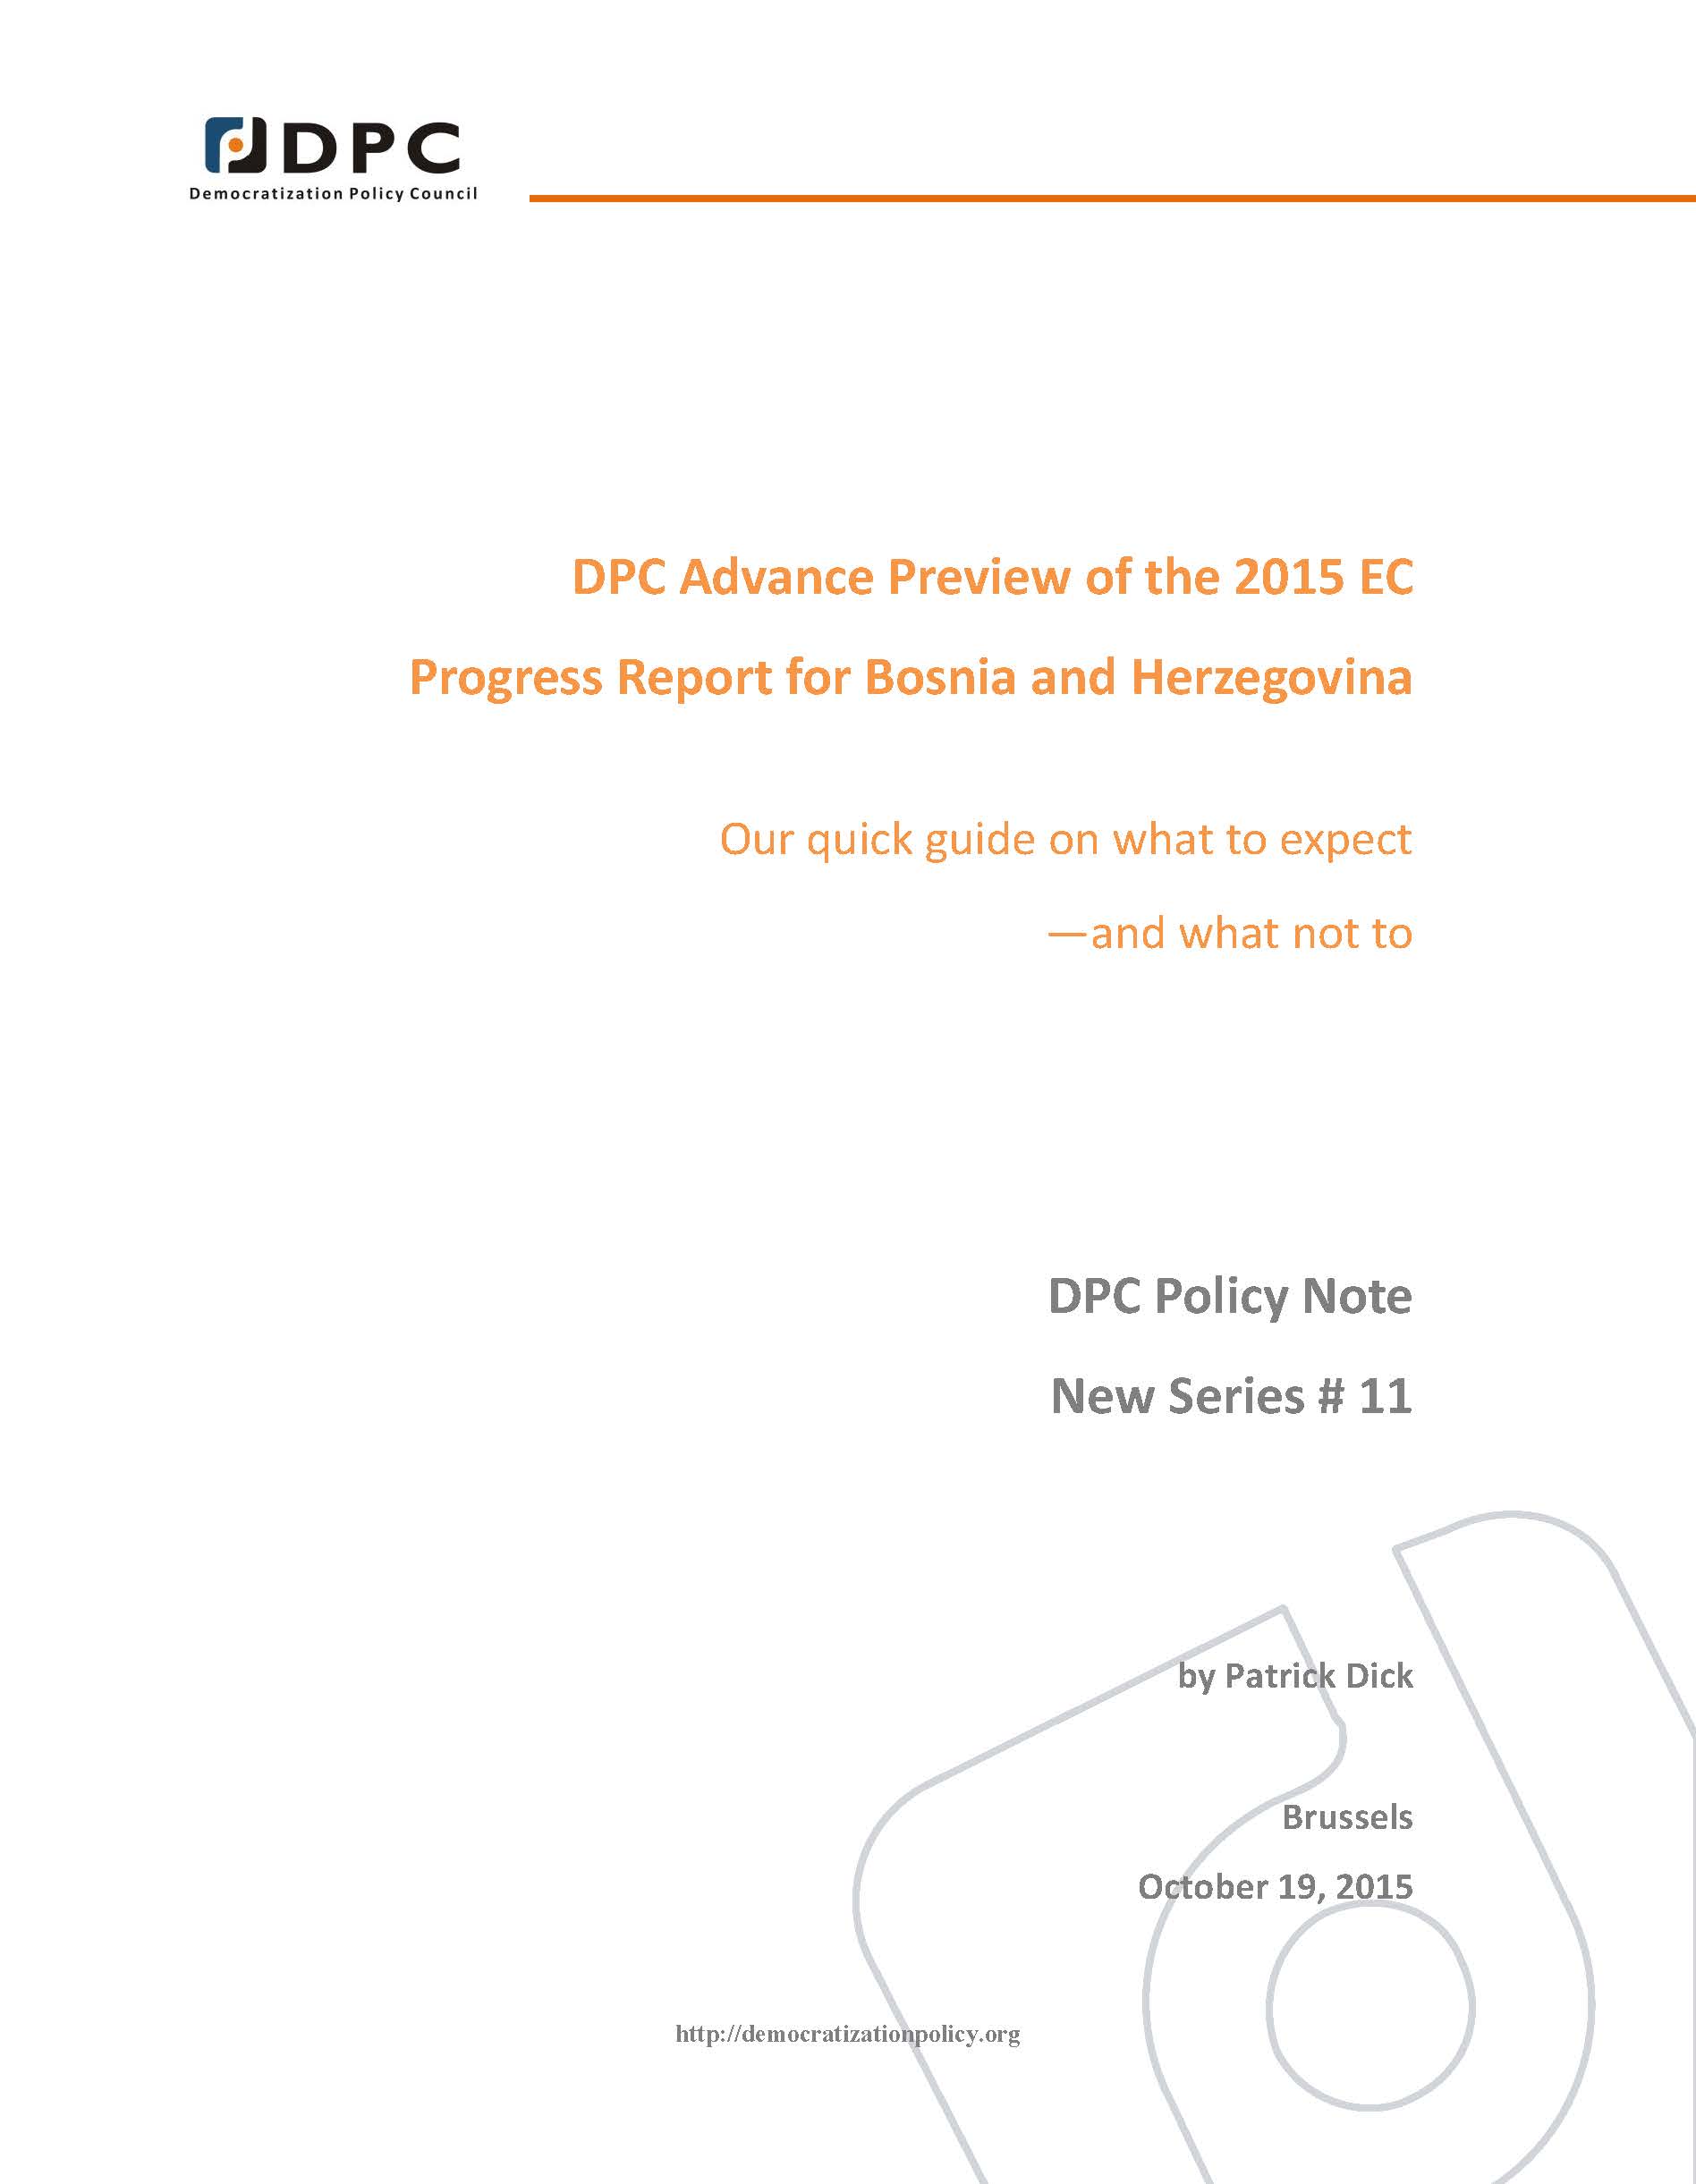 DPC POLICY NOTE 11: DPC Advance Preview of the 2015 EC. Progress Report for Bosnia and Herzegovina. Our quick guide on what to expect—and what not to. Cover Image